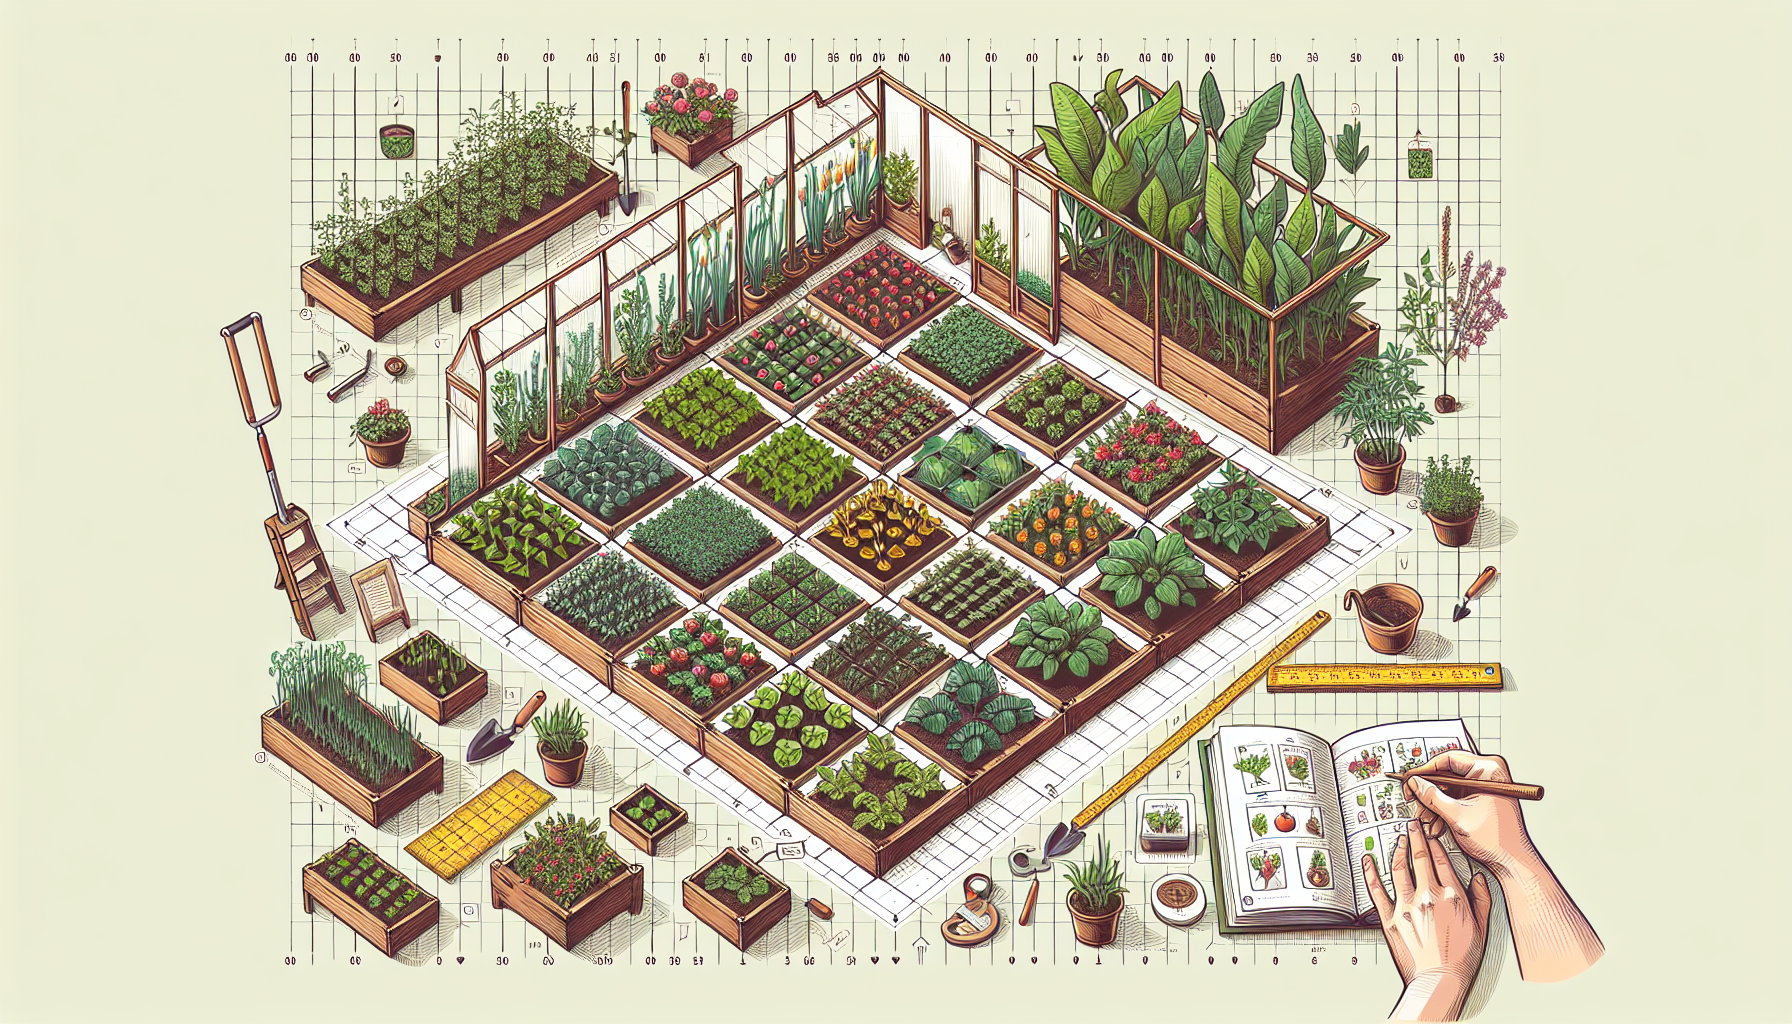 The Complete Guide to Square Foot Gardening in a Greenhouse